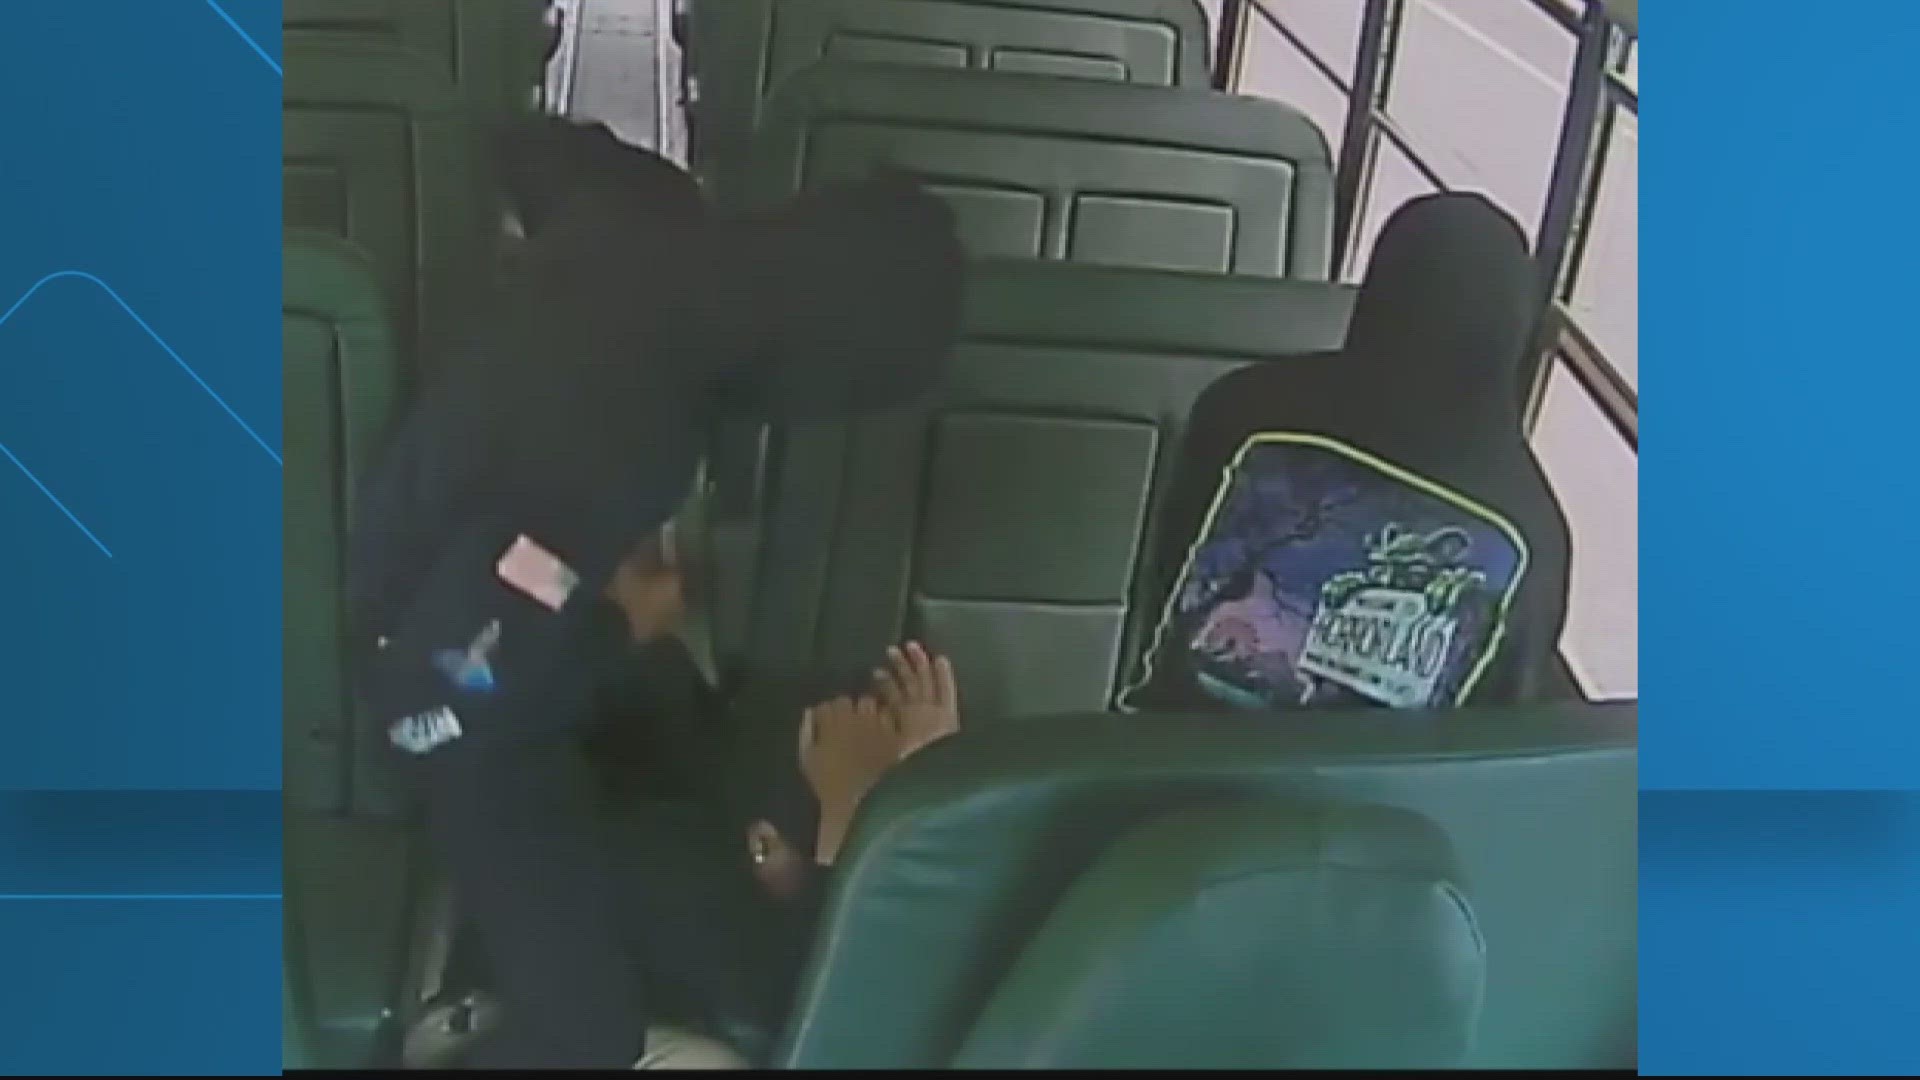 A 14-year-old middle school girl has been arrested and charged for arranging an attack on a Prince George's County school bus that nearly turned deadly.